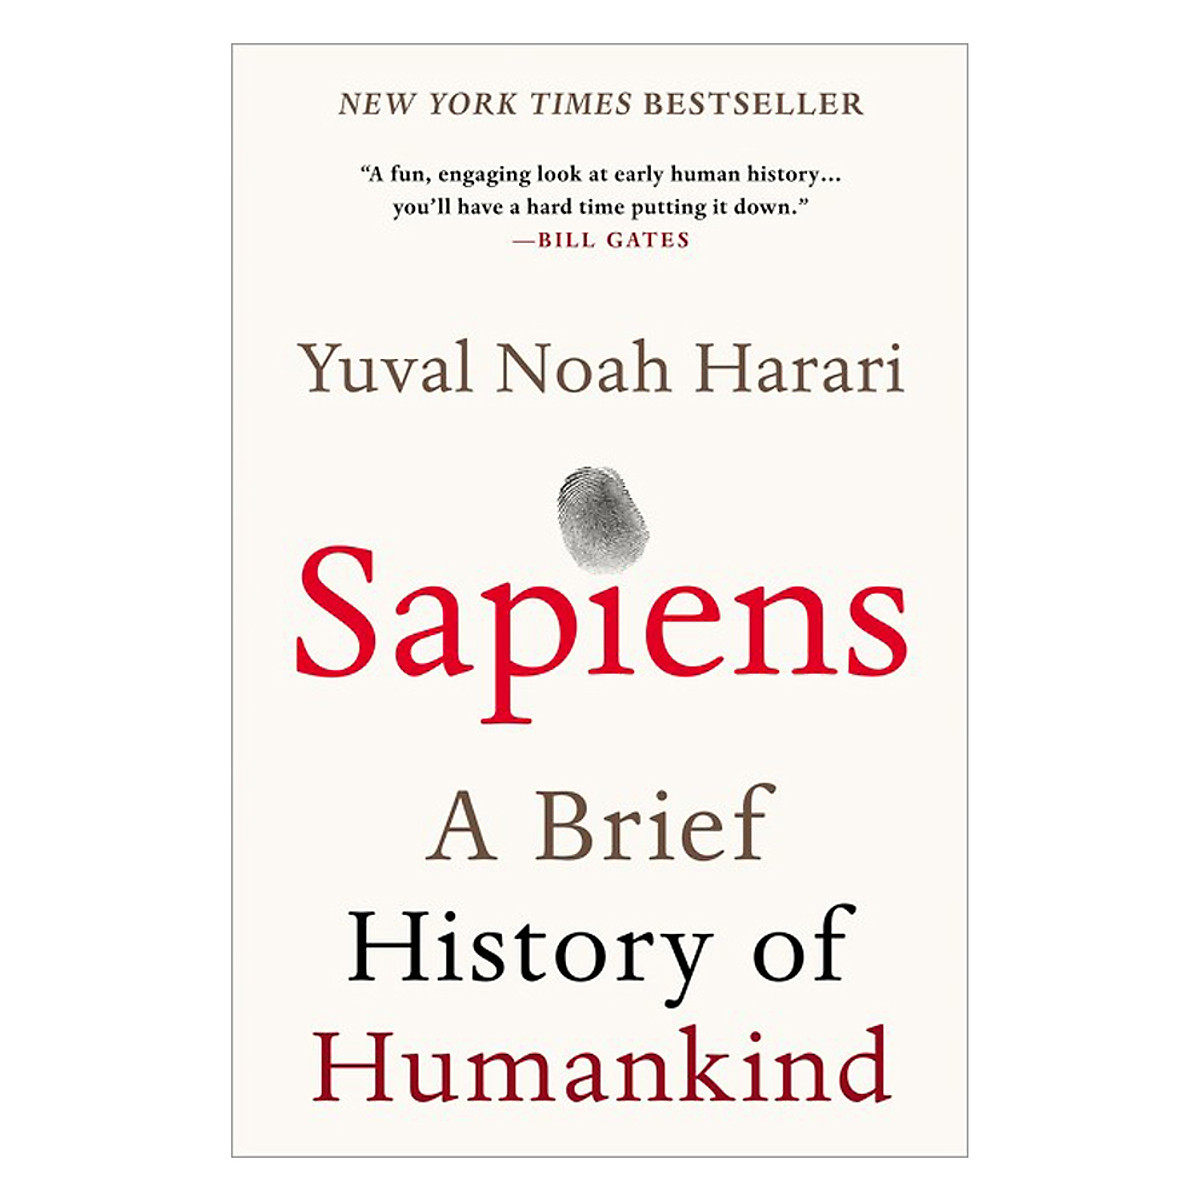 Sapiens : A Brief History of Humankind (Paperback)